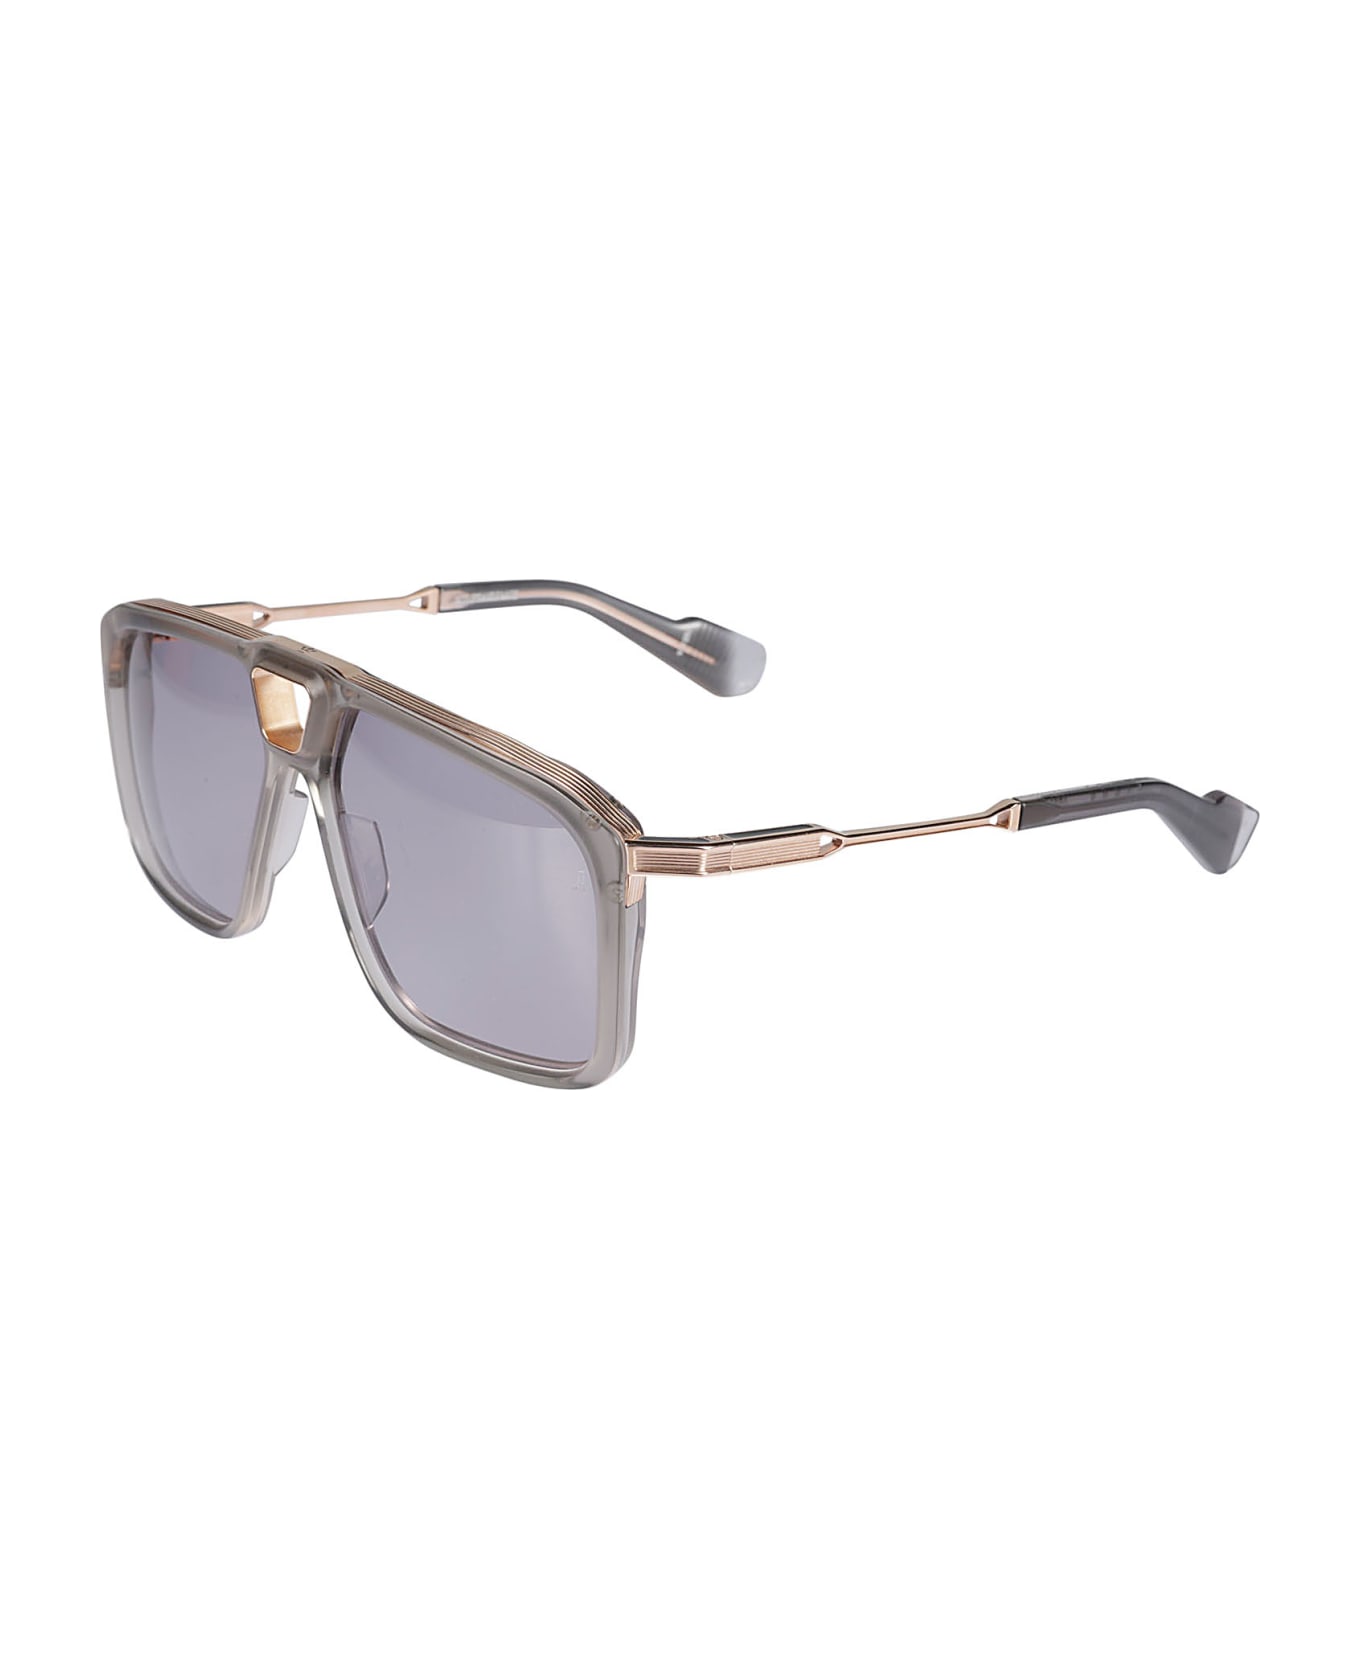 Jacques Marie Mage Savoy Sunglasses - Charcoal